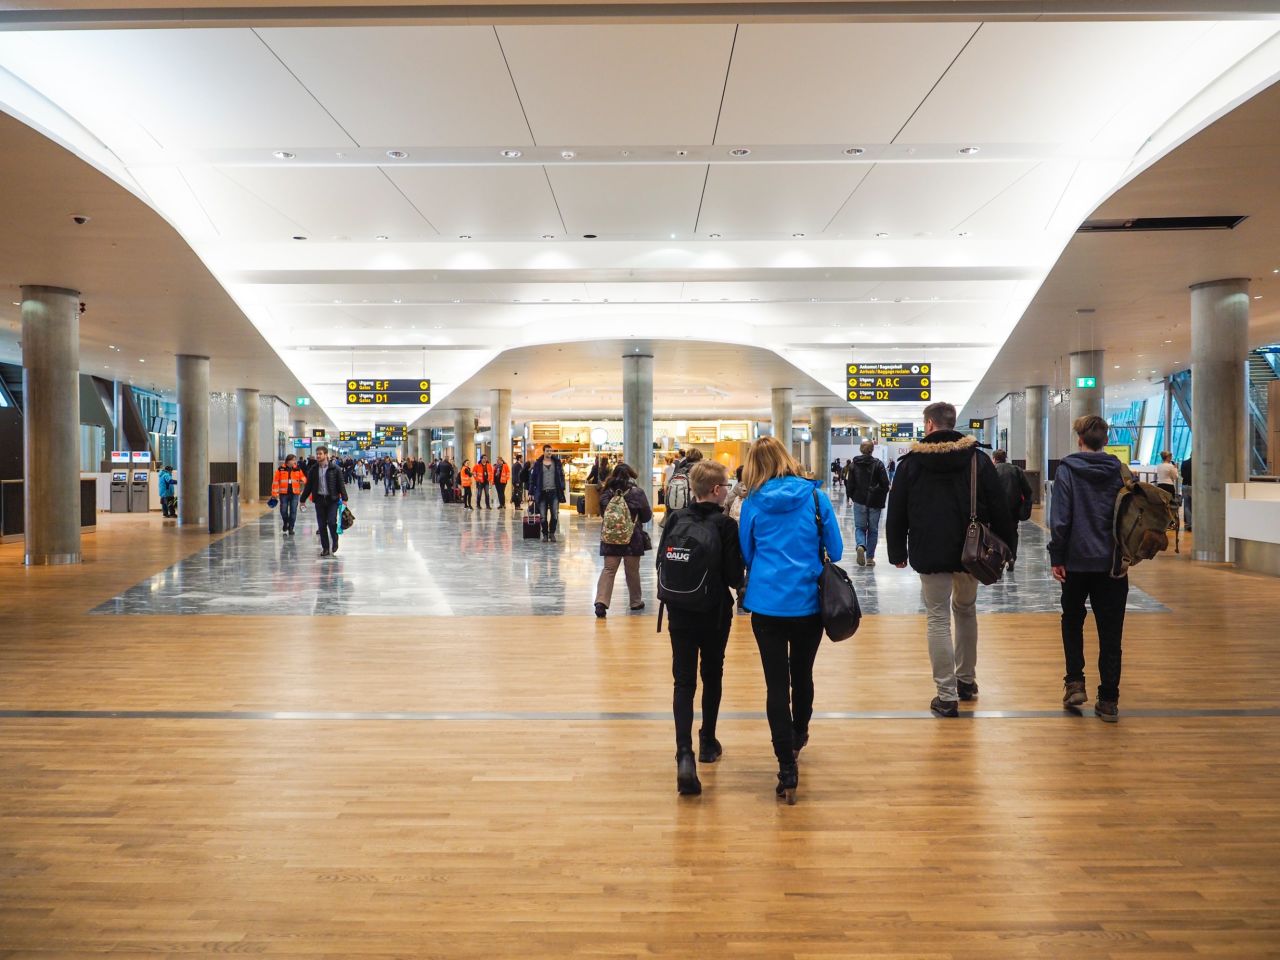 <strong>Goals:</strong> "We did not start this project with the goal of becoming the world's most environmentally friendly airport, but we did have an ambitious goal of reducing energy consumption by 50%," says Susæg. 